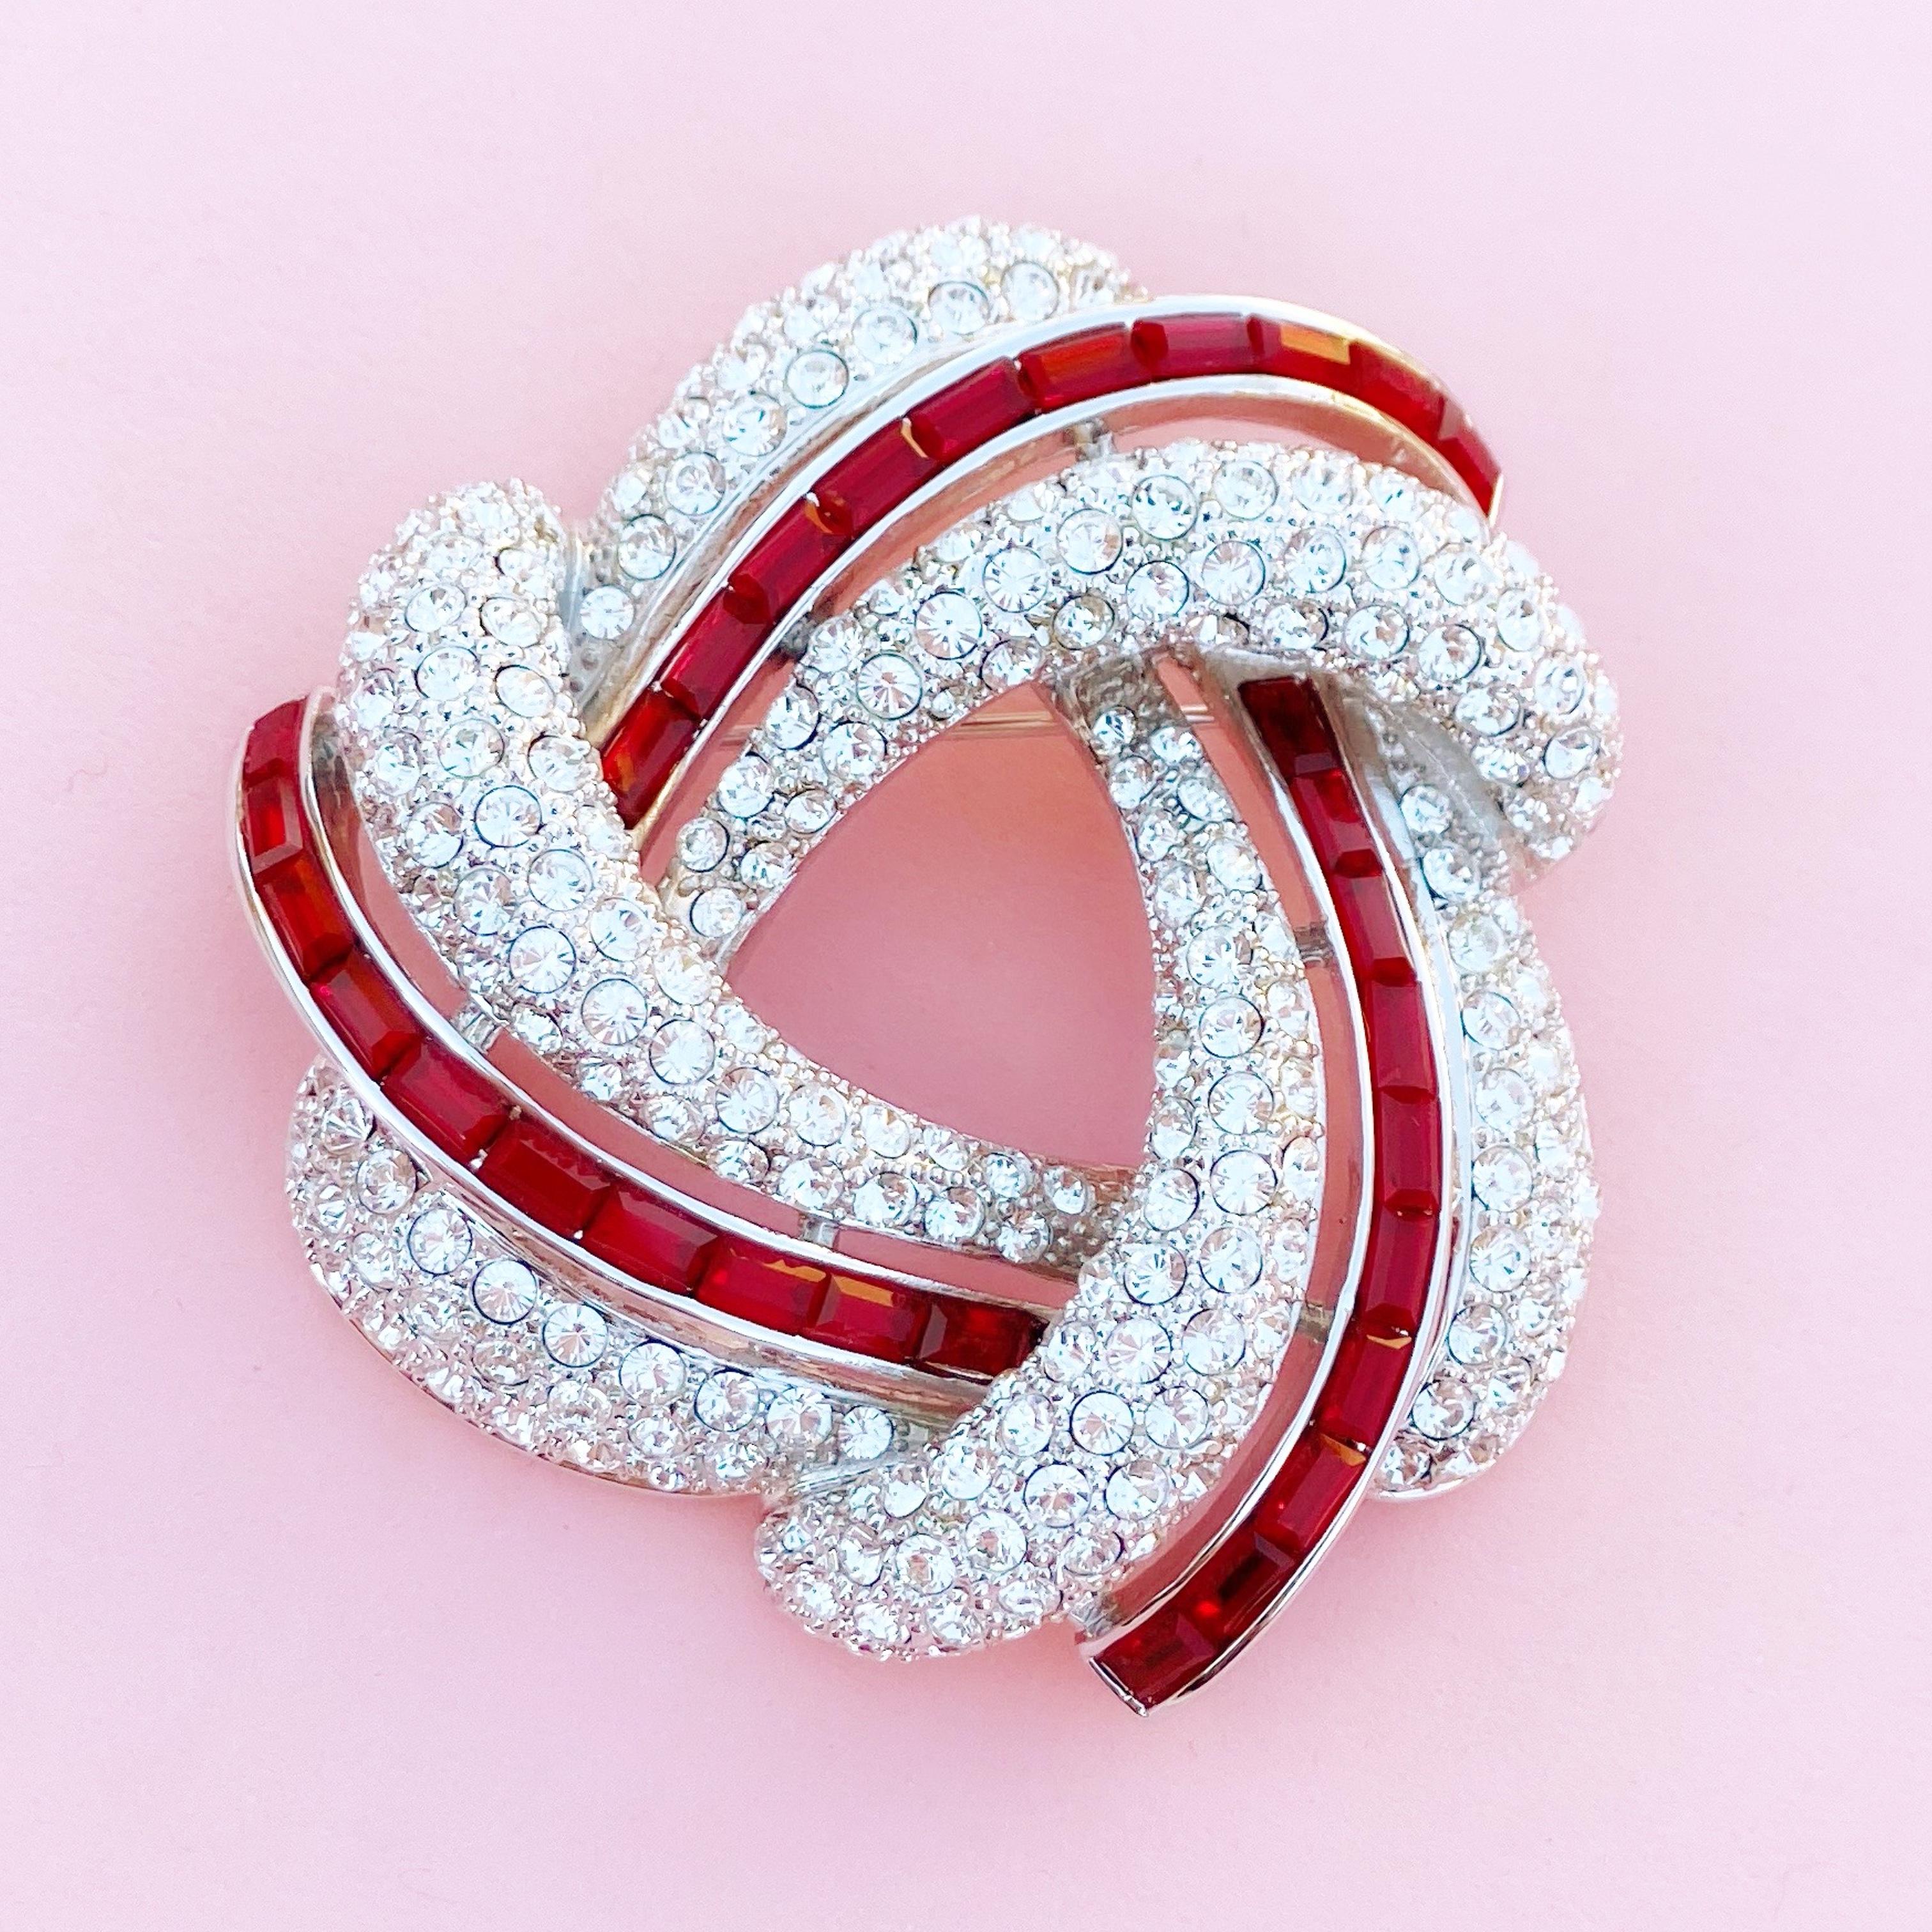 Modern Silver Knot Brooch w Crystal Pavé & Red Crystal Baguettes by Nolan Miller, 1990s